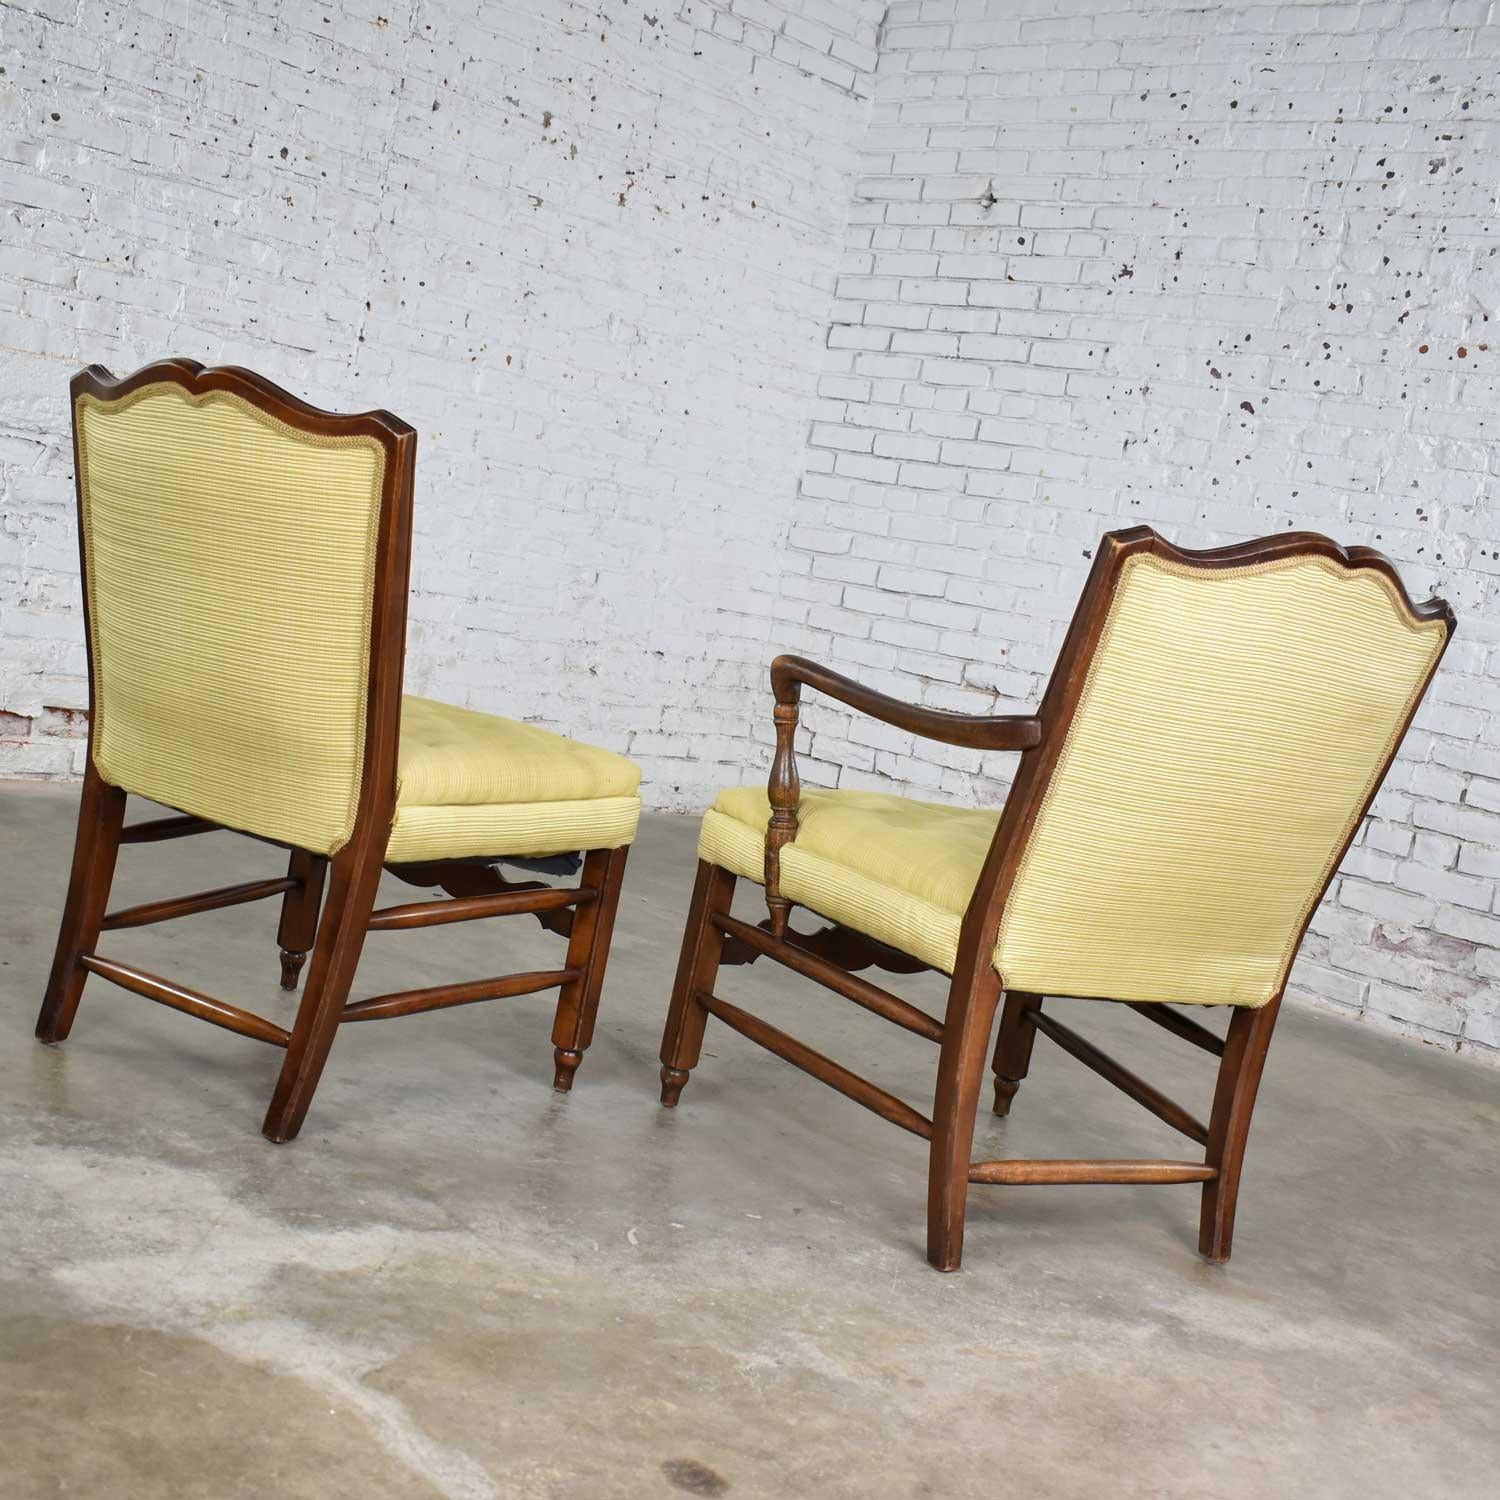 Pair of Georgian Revival His and Hers Accent Chairs in Golden Yellow 1